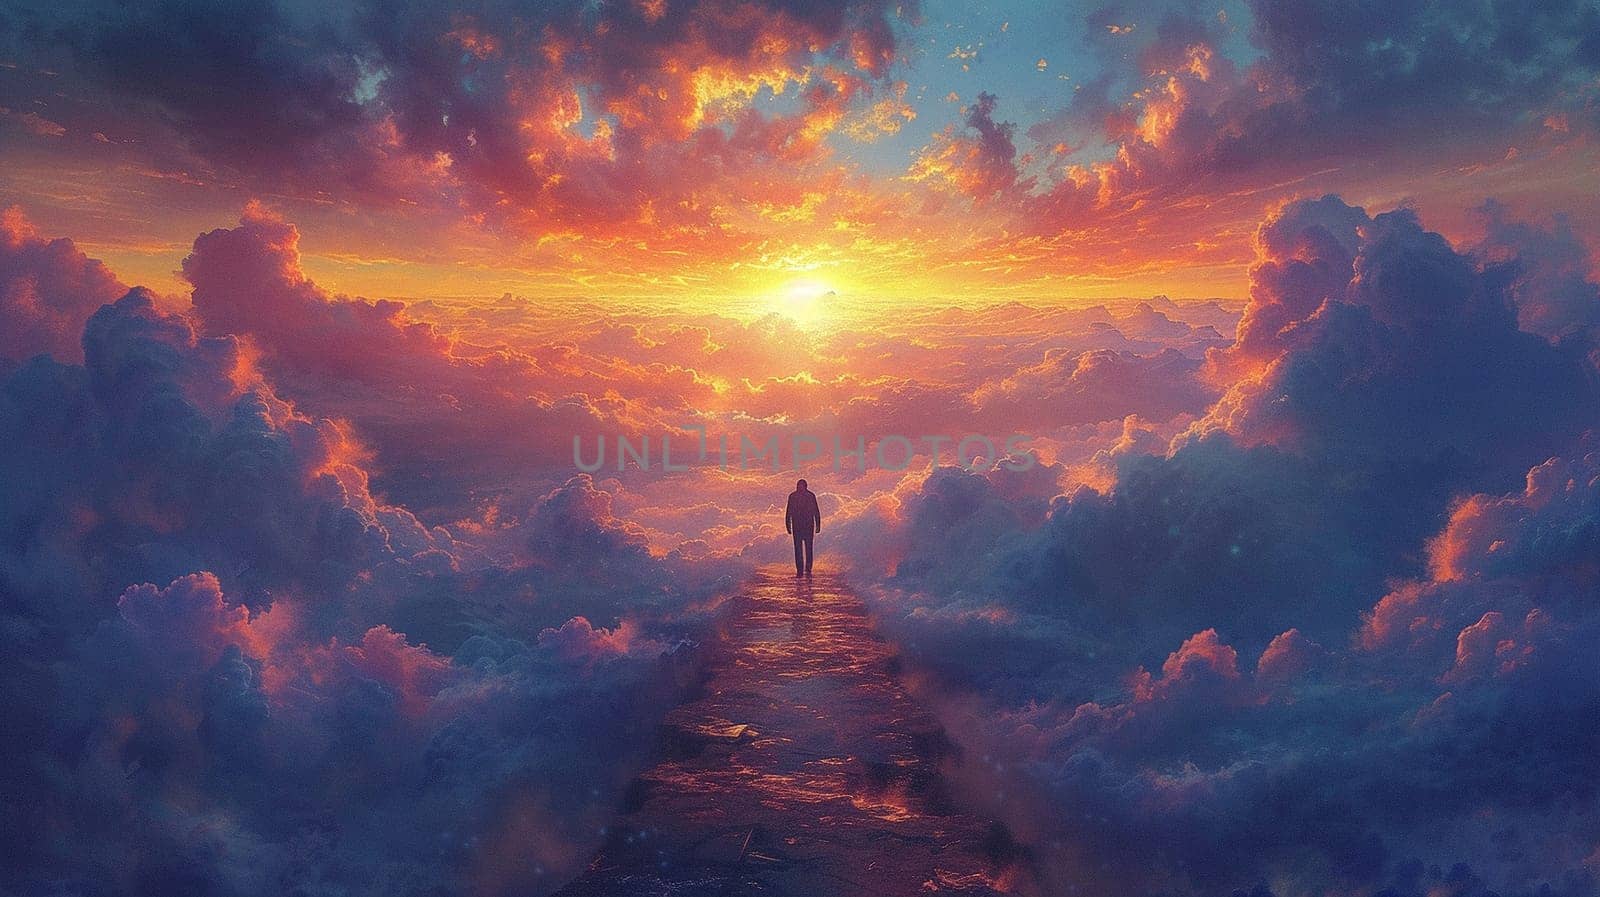 Way to the heaven. Professional inspiring art by NeuroSky